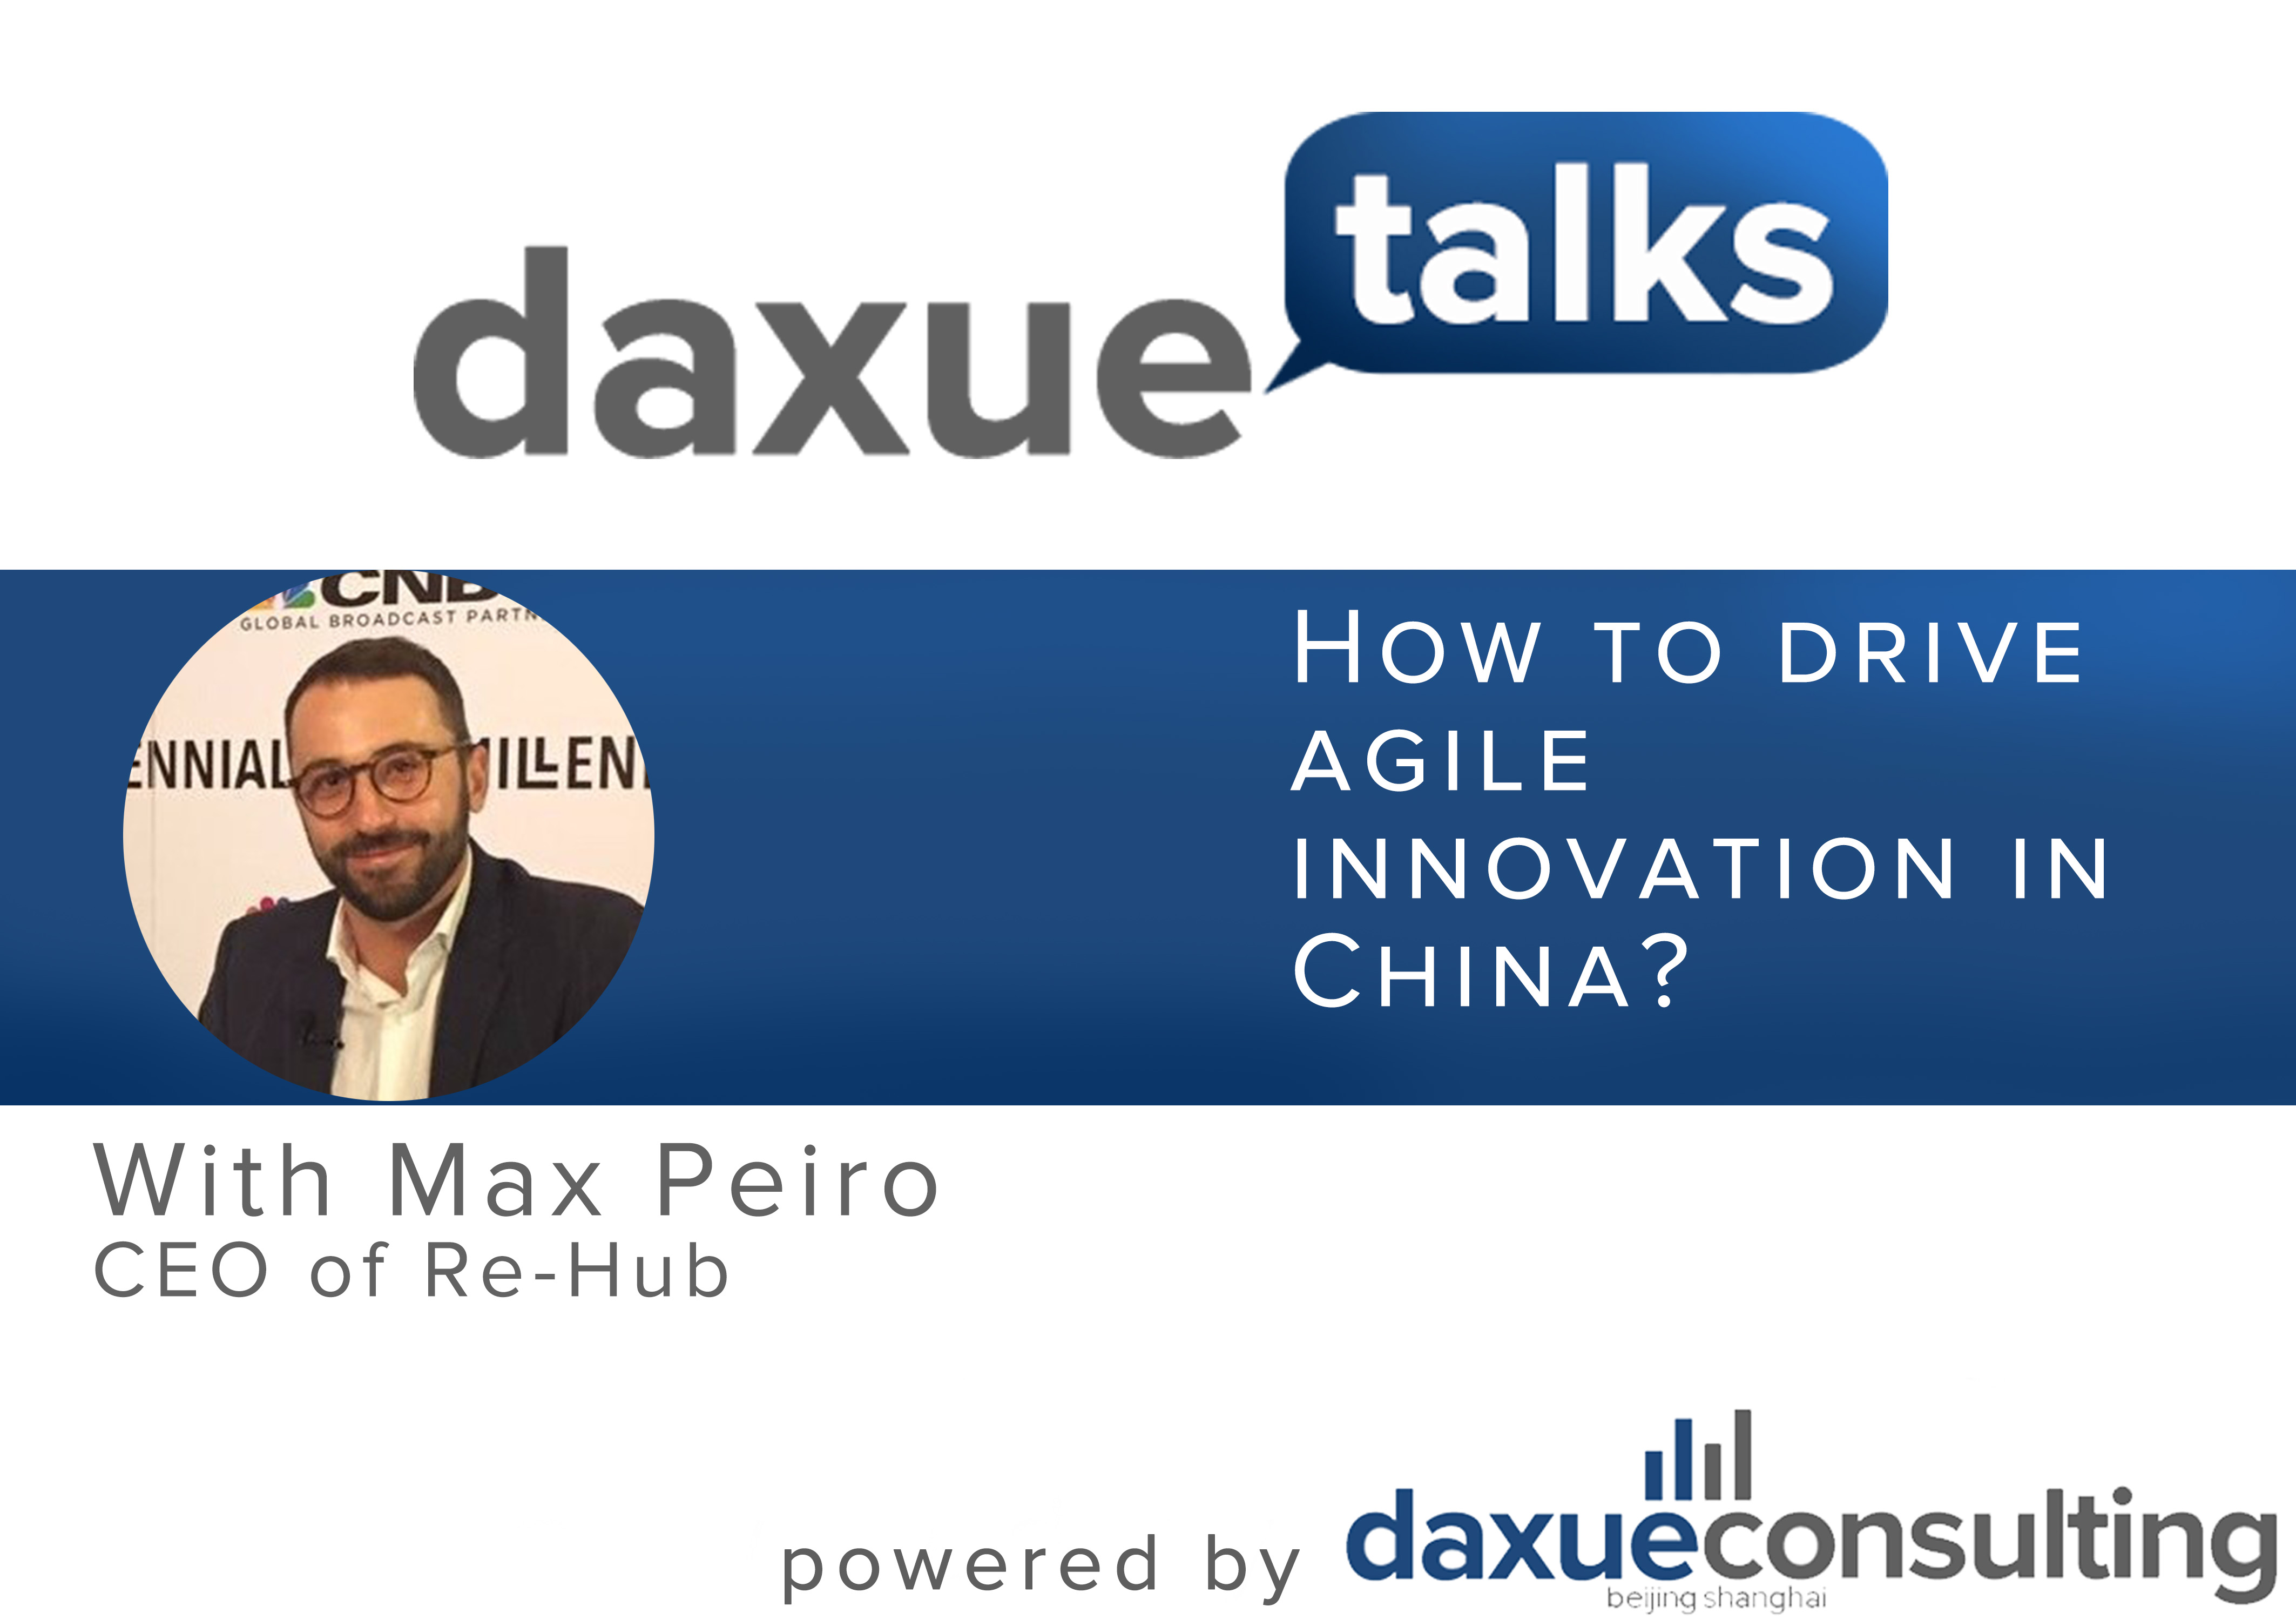 Daxue Talks 23: How to drive agile innovation in China?